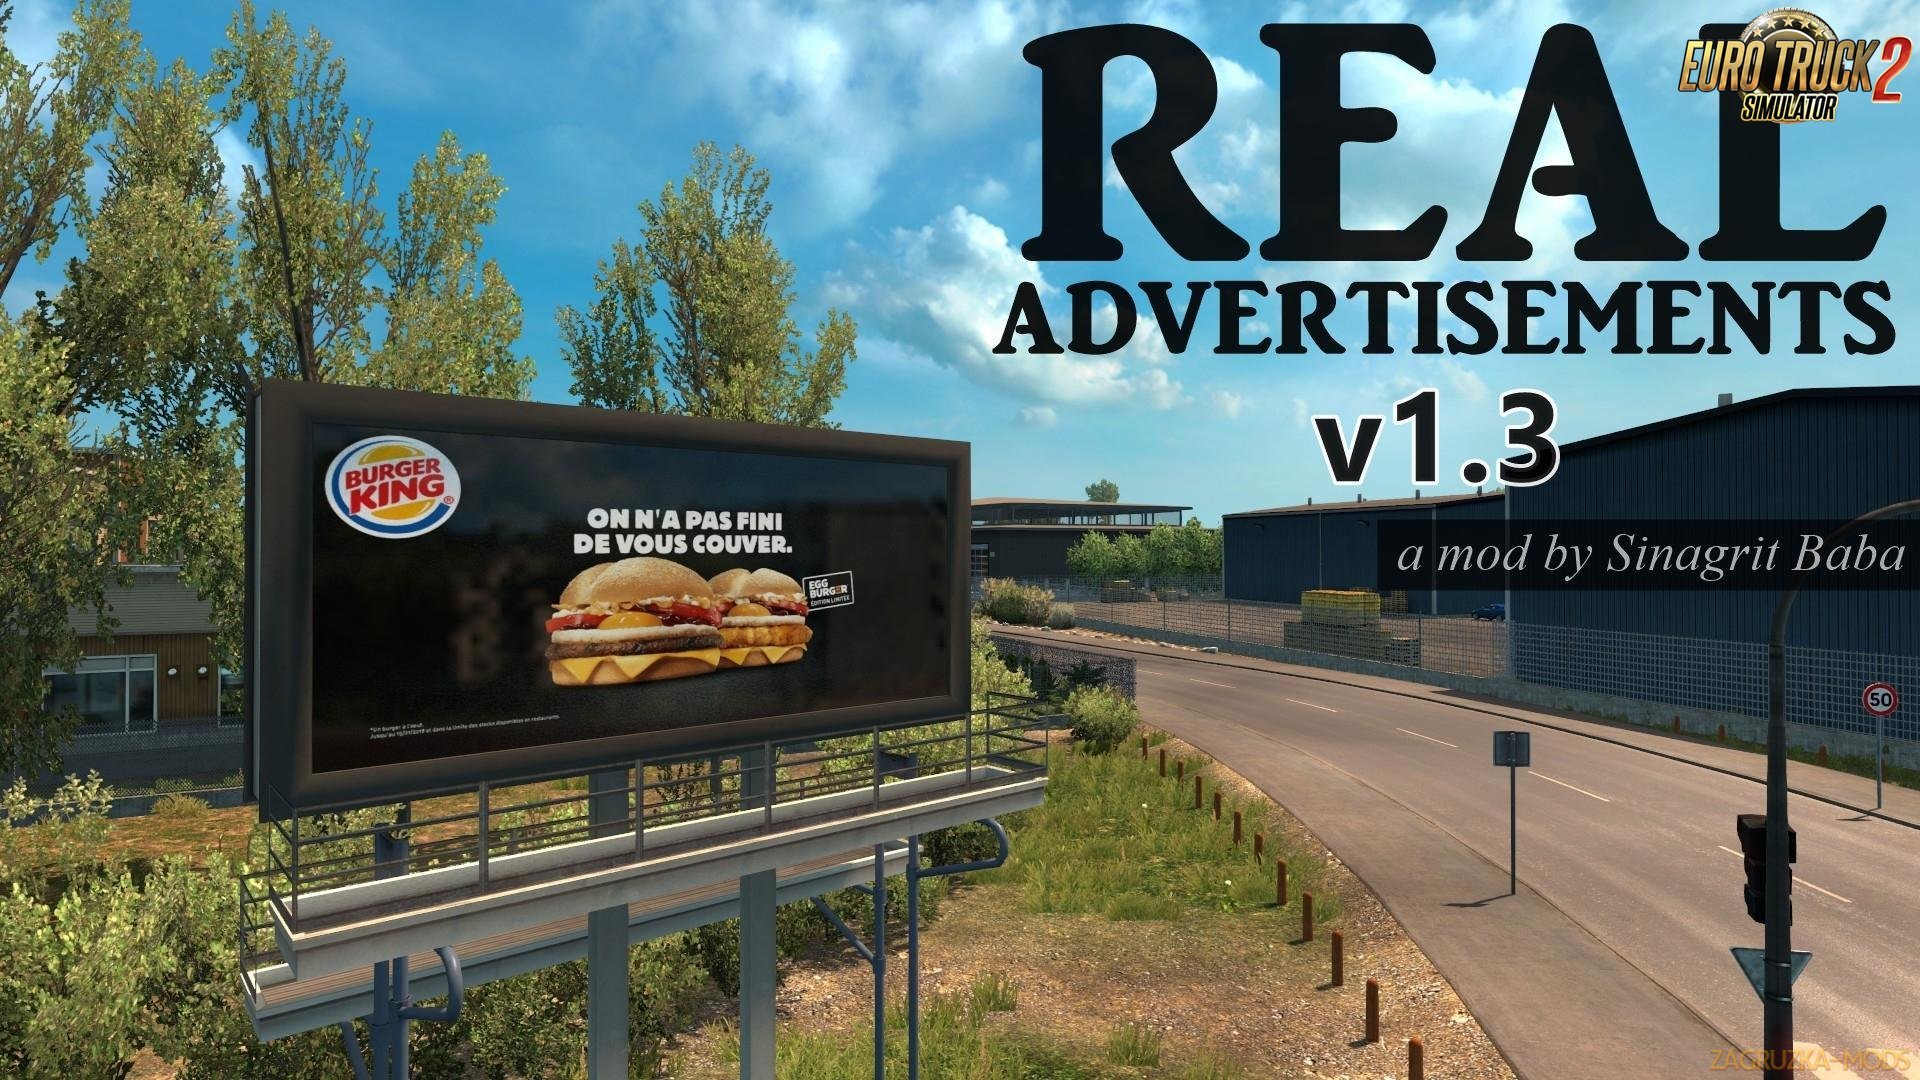 Real Advertisements v1.3 for Ets2